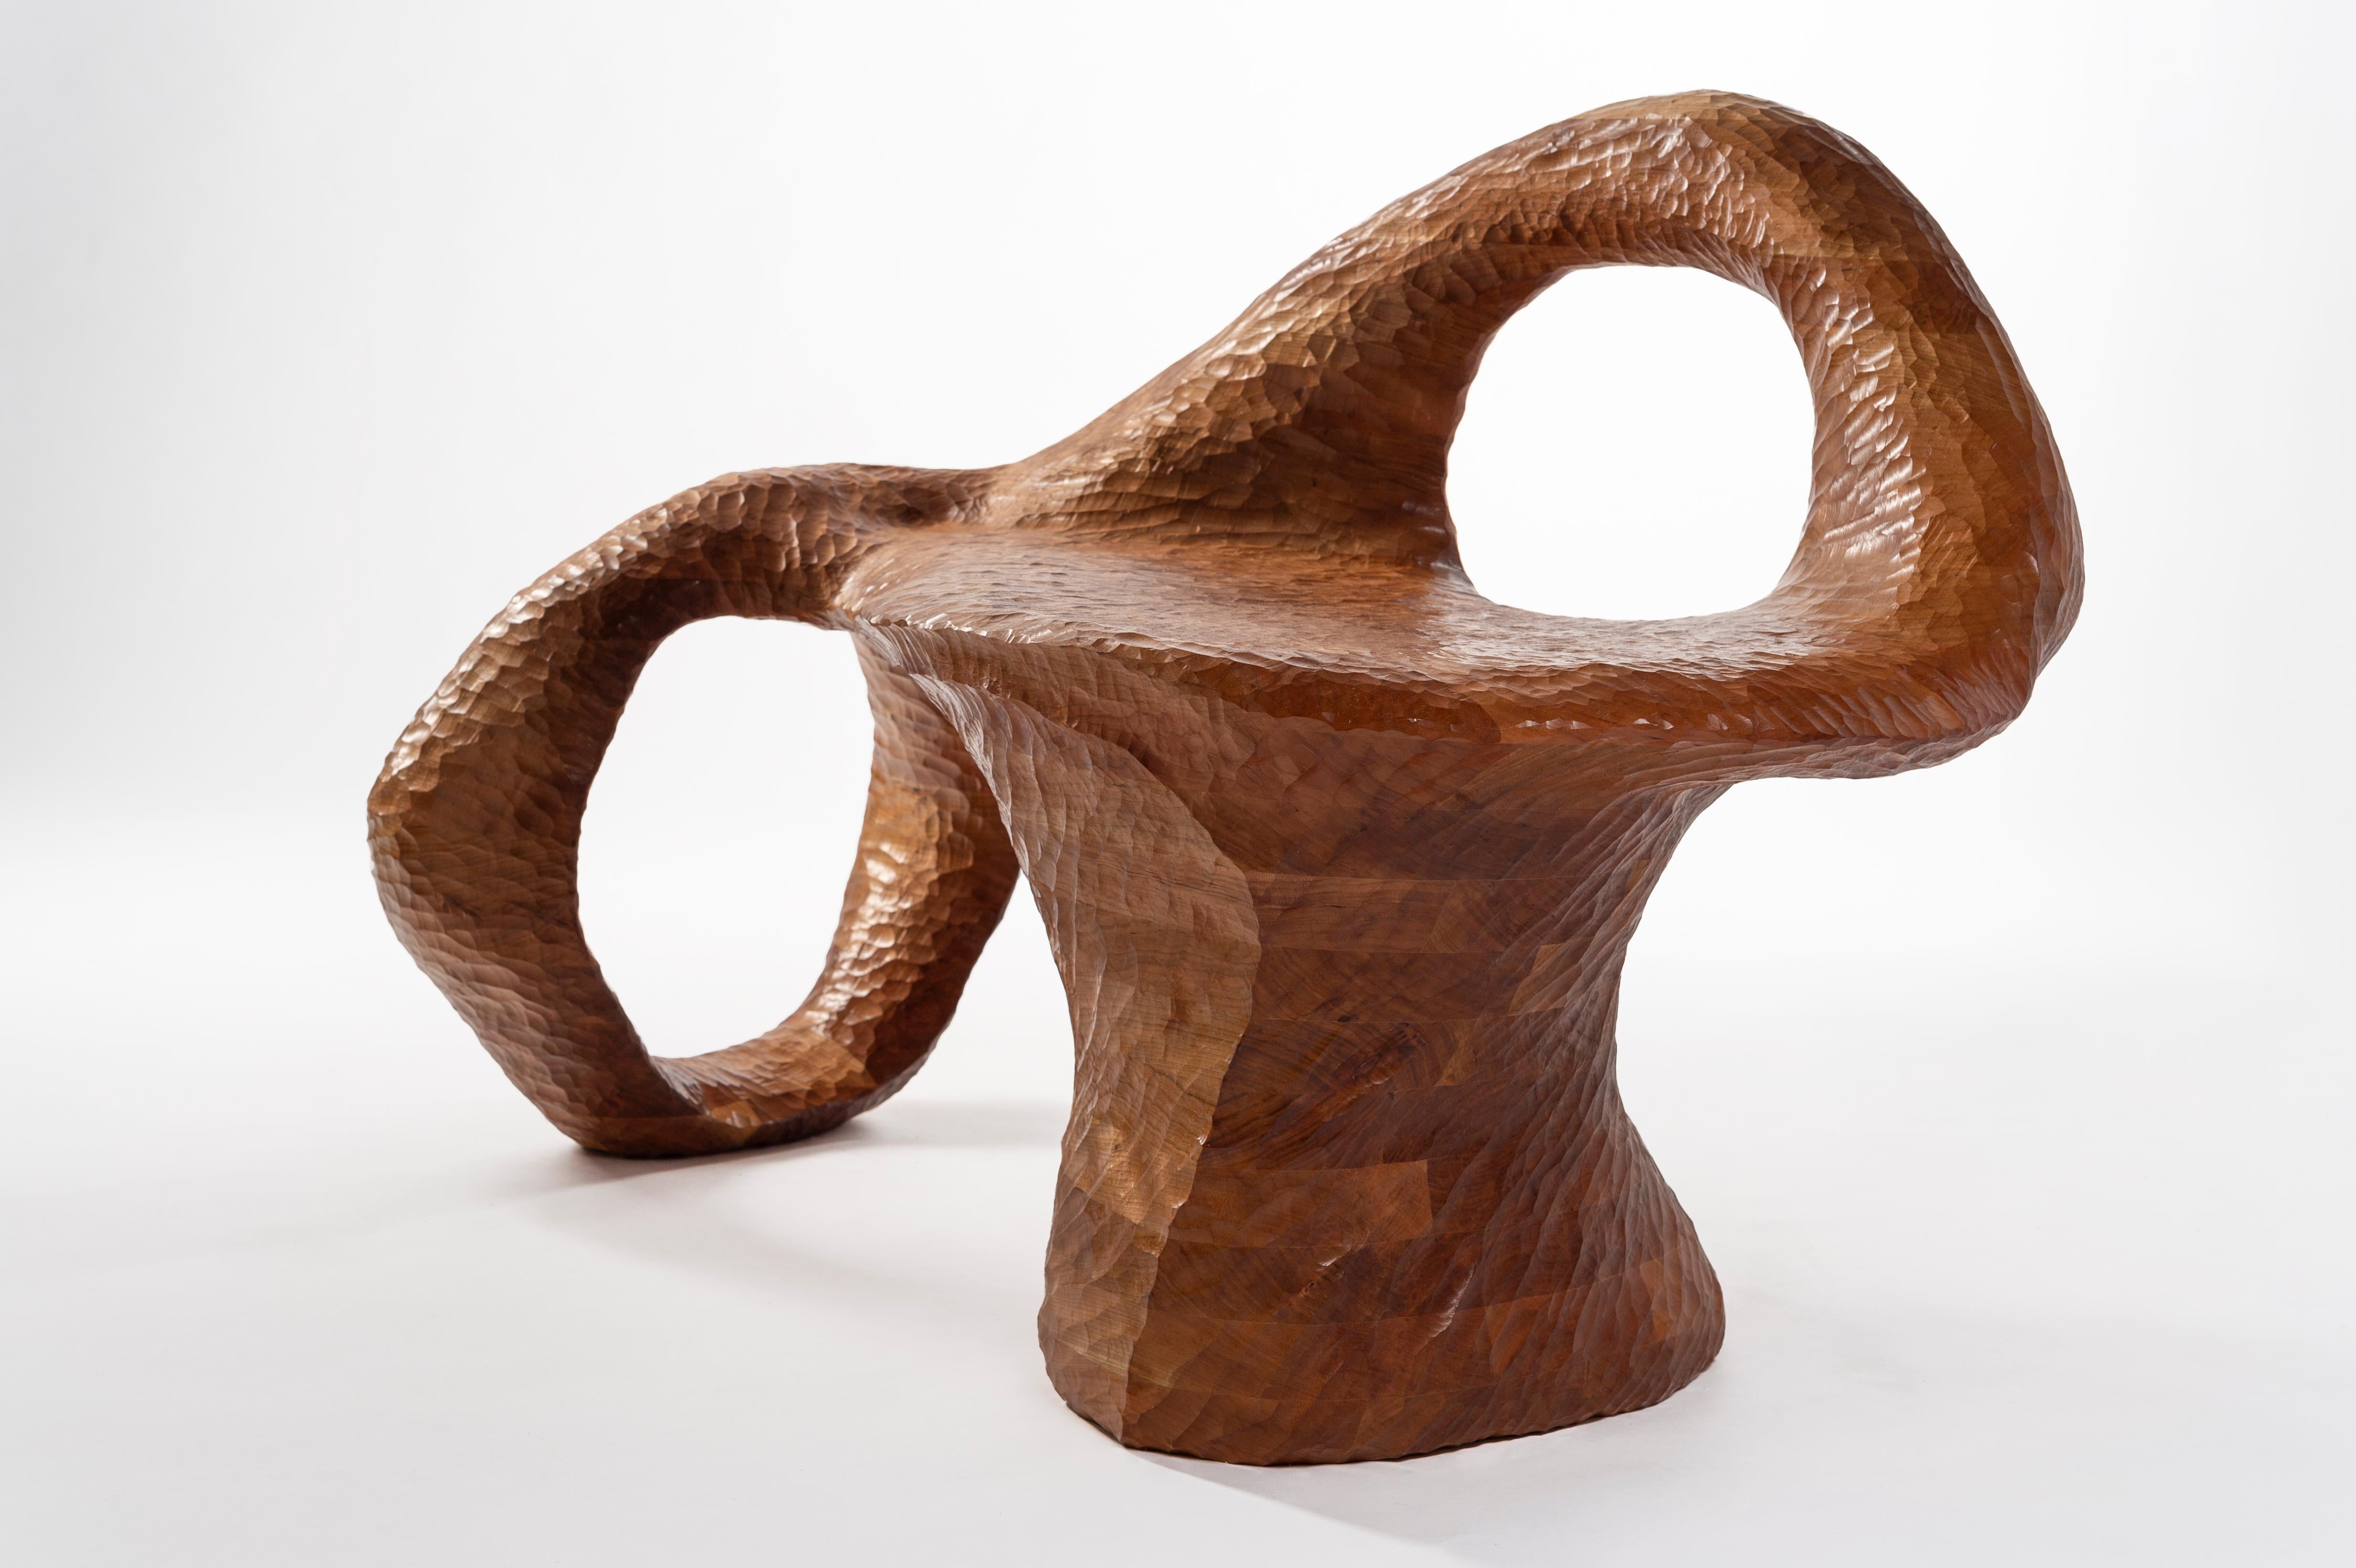 Chair, Carved wood sculpture - Sculpture by Jared Abner